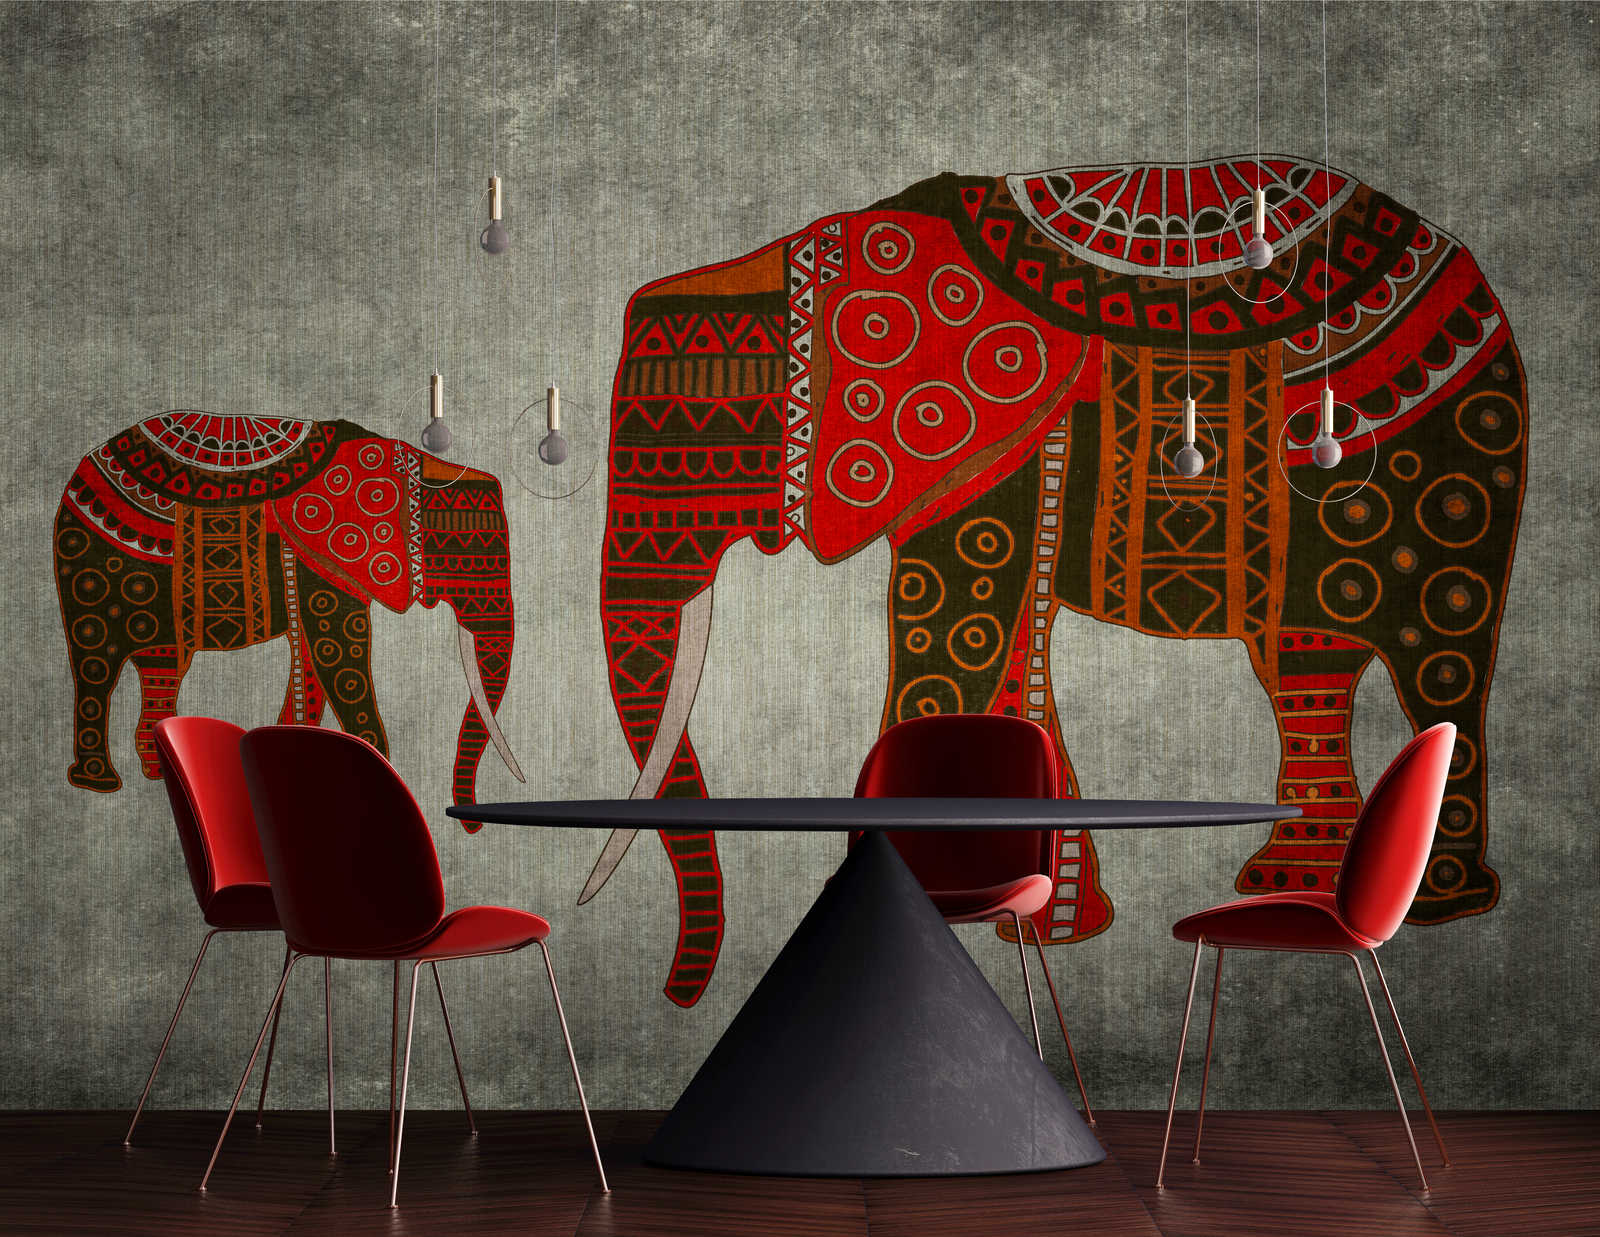             Nairobi 4 - Elephant mural with ethnic patterns & texture effect
        